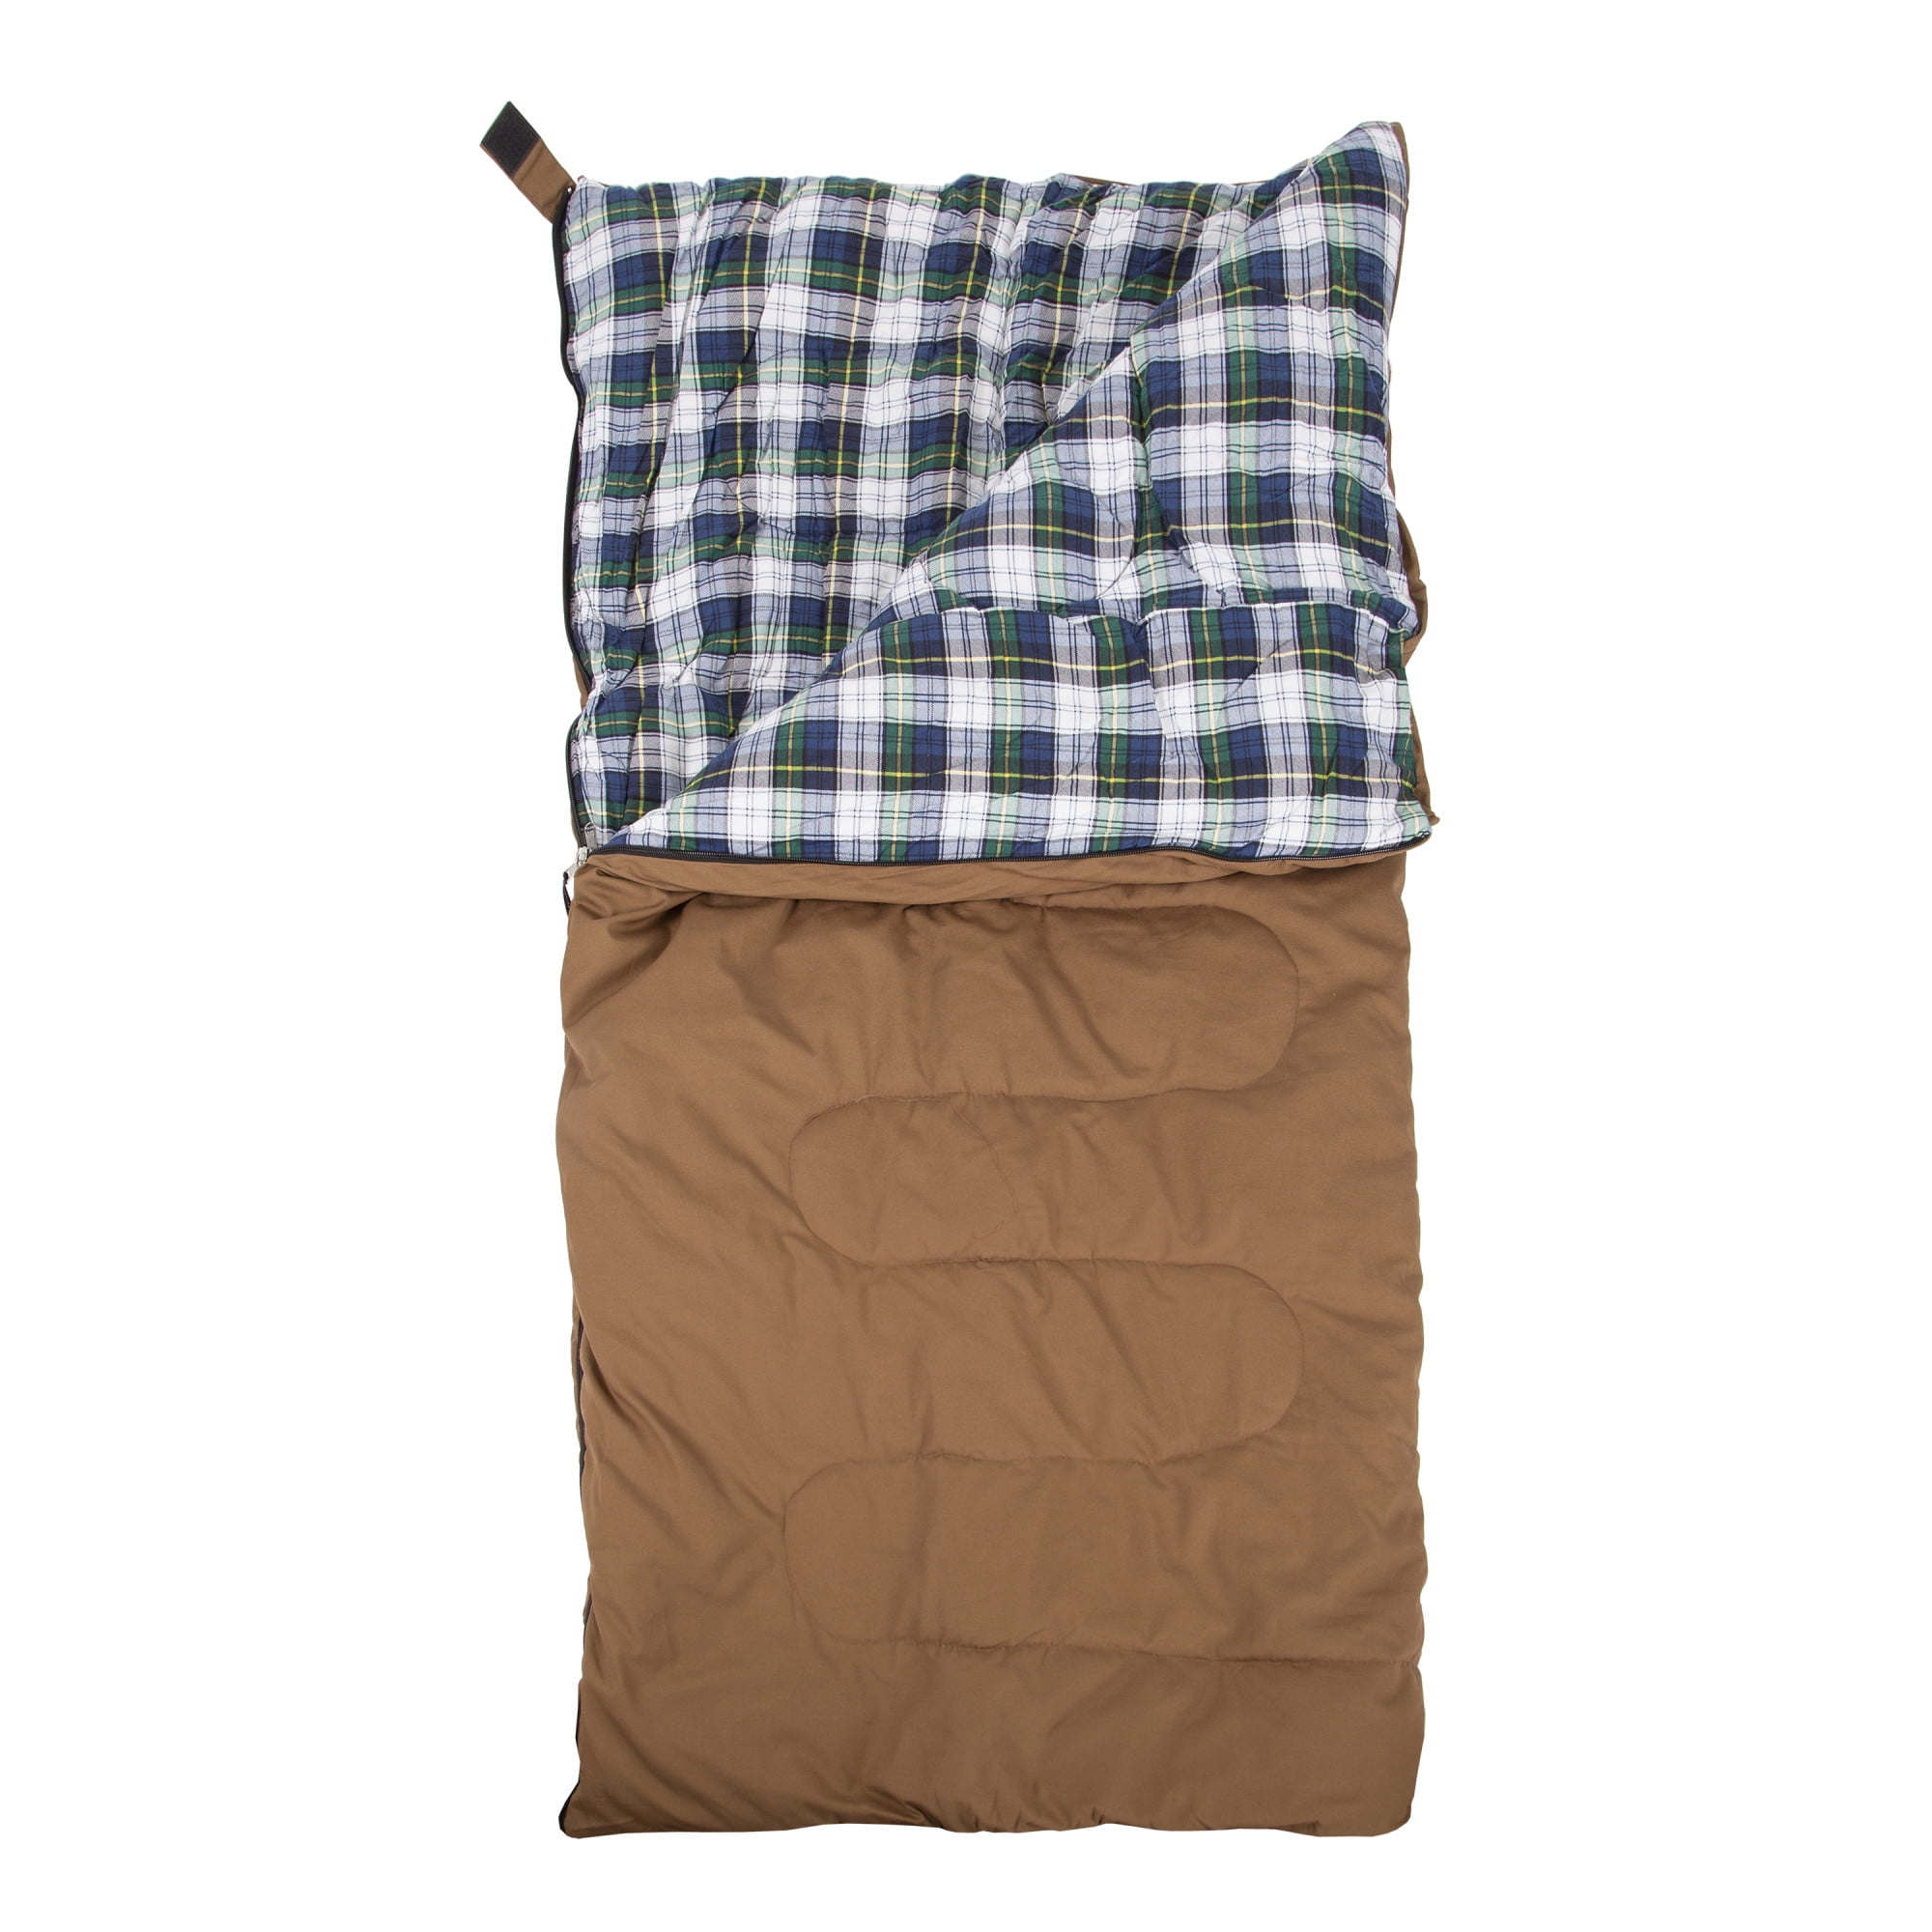 for camping Adult Canvas Sleeping Bag with pillow Coleman Big Game 5 Degree 